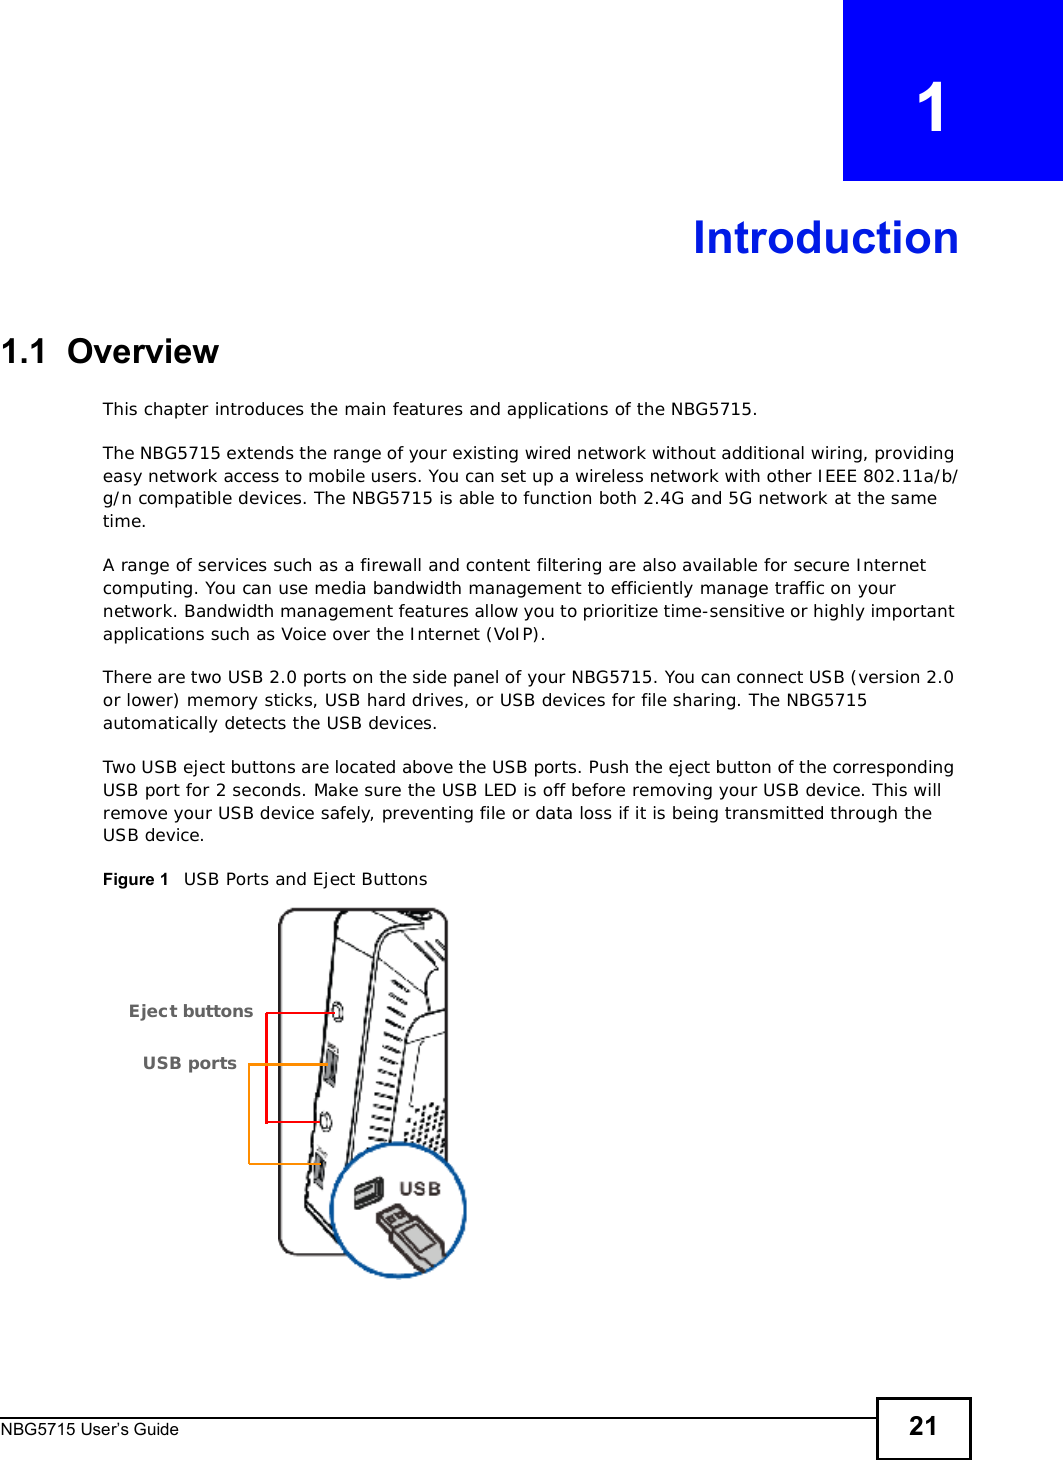 NBG5715 User’s Guide 21CHAPTER   1Introduction1.1  OverviewThis chapter introduces the main features and applications of the NBG5715.The NBG5715 extends the range of your existing wired network without additional wiring, providing easy network access to mobile users. You can set up a wireless network with other IEEE 802.11a/b/g/n compatible devices. The NBG5715 is able to function both 2.4G and 5G network at the same time.A range of services such as a firewall and content filtering are also available for secure Internet computing. You can use media bandwidth management to efficiently manage traffic on your network. Bandwidth management features allow you to prioritize time-sensitive or highly important applications such as Voice over the Internet (VoIP). There are two USB 2.0 ports on the side panel of your NBG5715. You can connect USB (version 2.0 or lower) memory sticks, USB hard drives, or USB devices for file sharing. The NBG5715 automatically detects the USB devices. Two USB eject buttons are located above the USB ports. Push the eject button of the corresponding USB port for 2 seconds. Make sure the USB LED is off before removing your USB device. This will remove your USB device safely, preventing file or data loss if it is being transmitted through the USB device.Figure 1   USB Ports and Eject ButtonsEject buttonsUSB ports